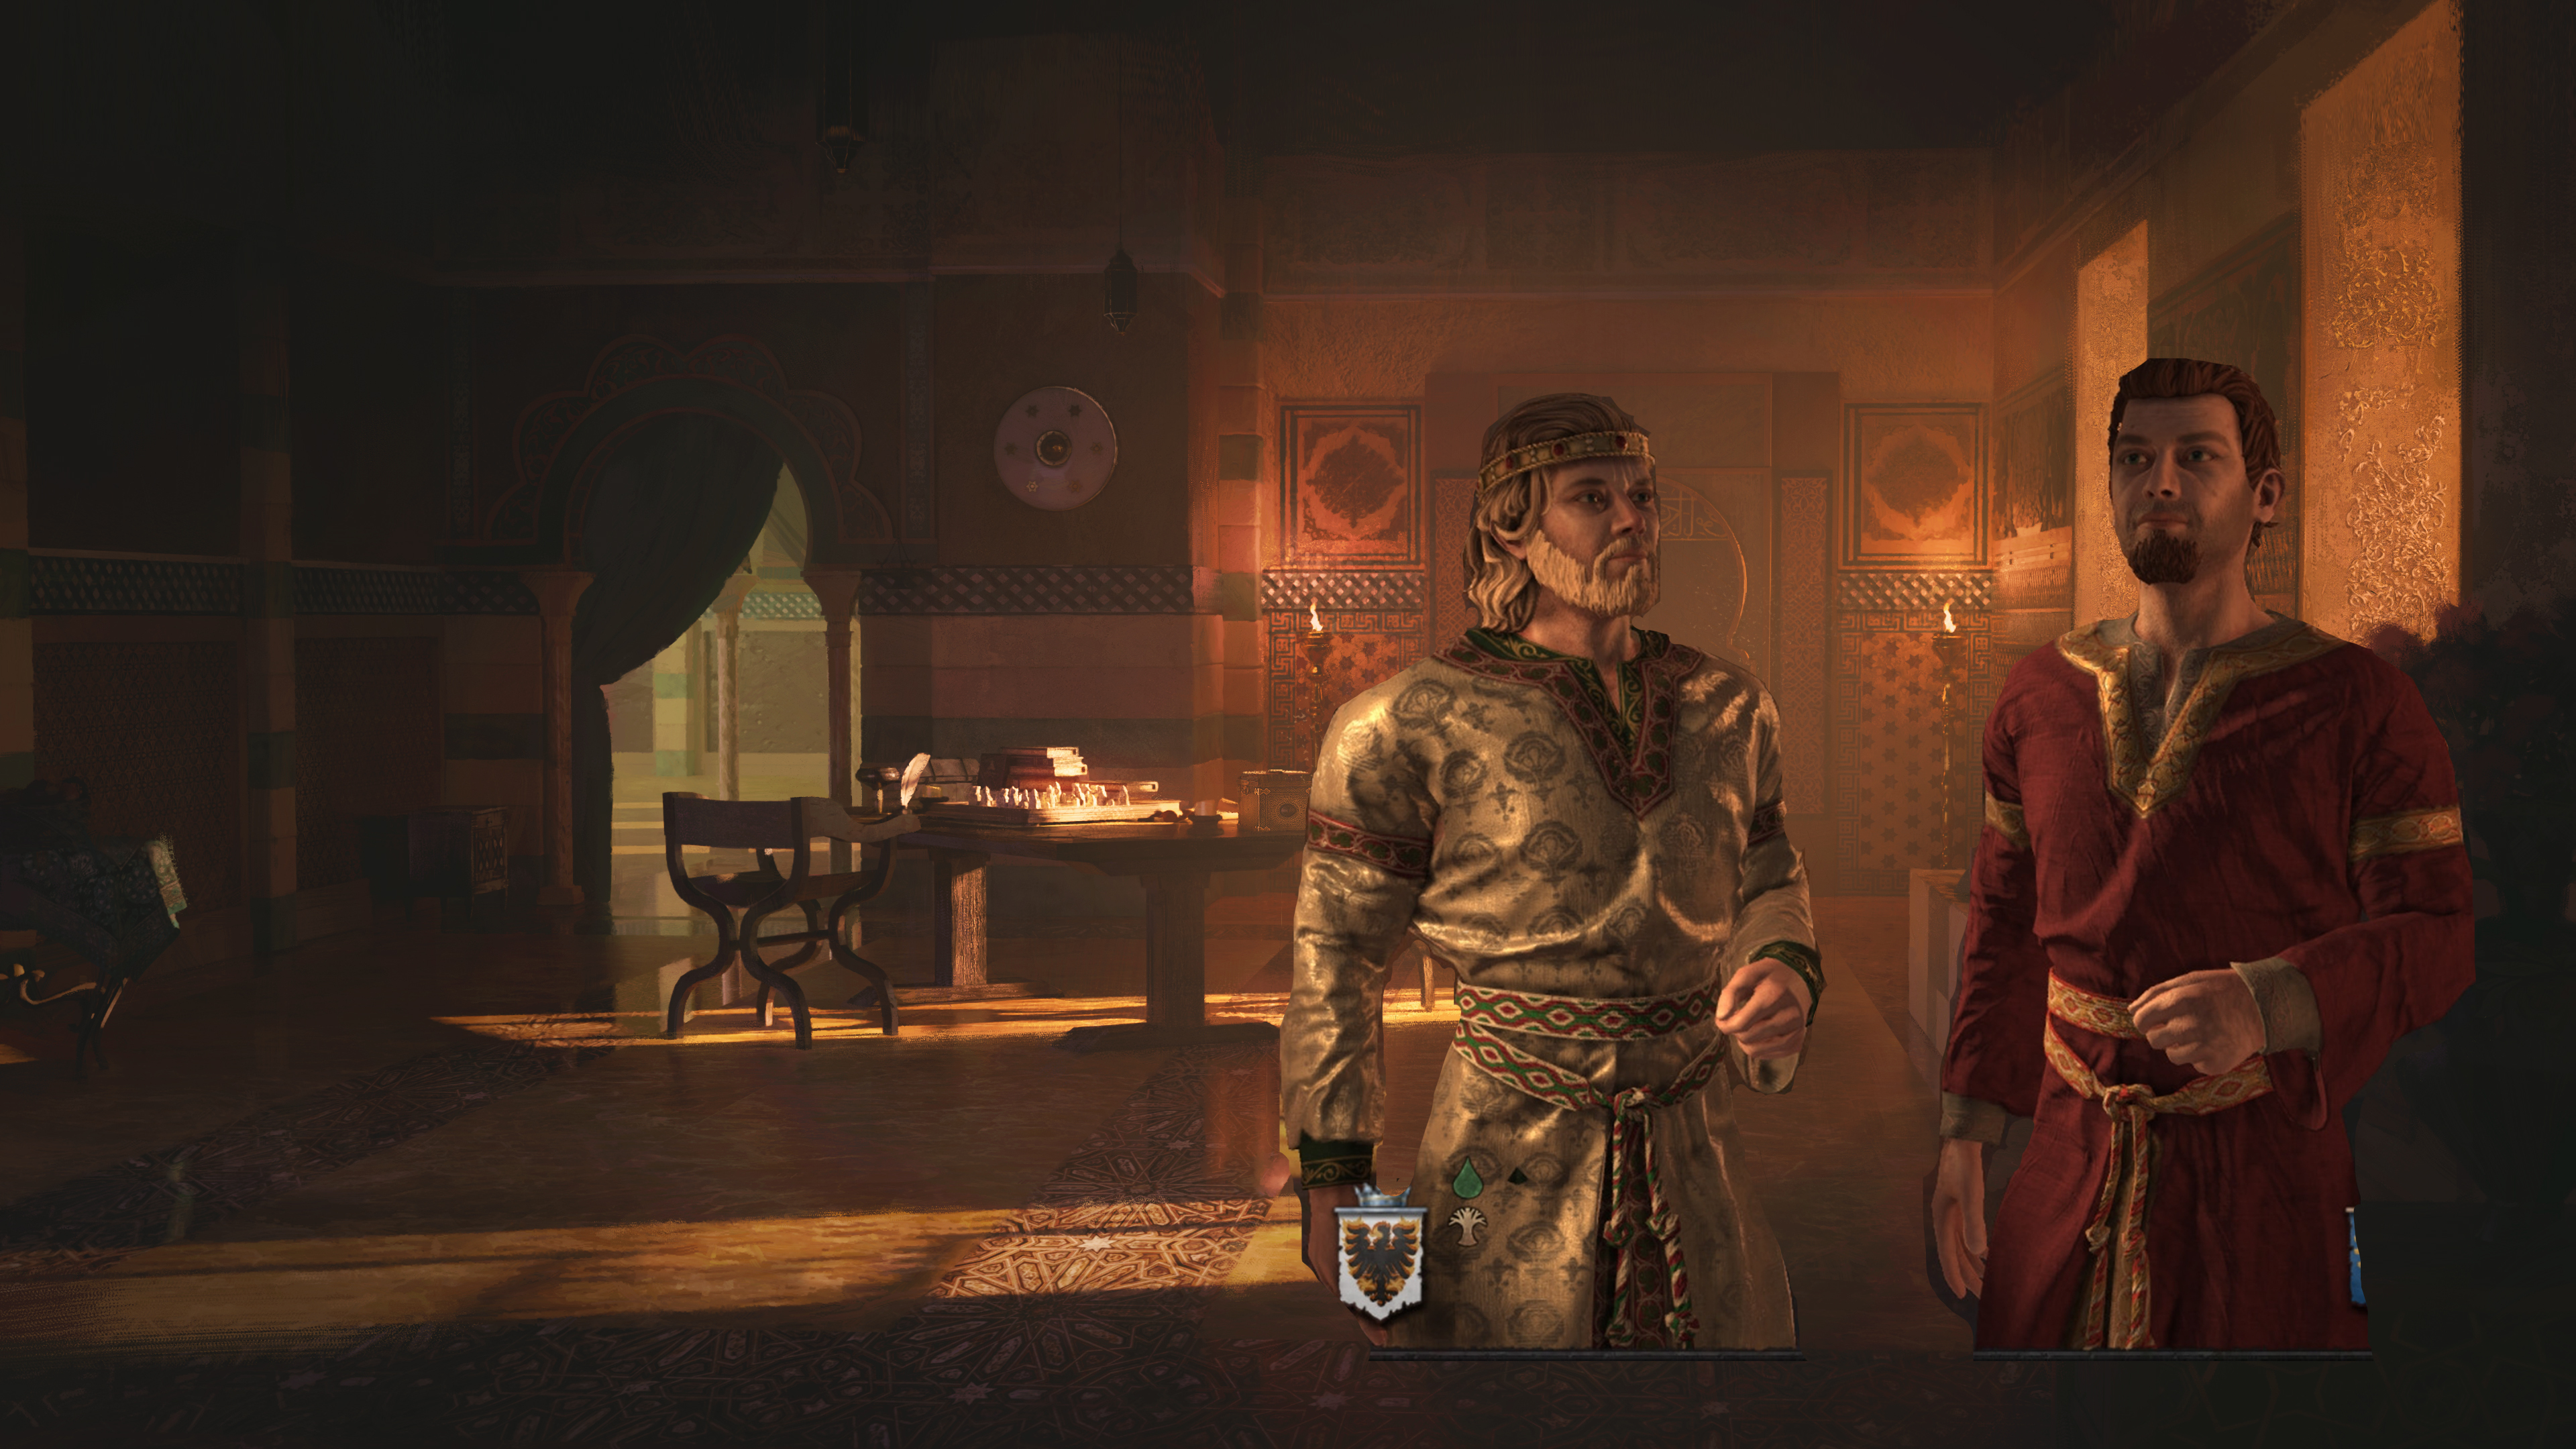 Multiplayer comes to Dragon Age with Inquisition's 4-player co-op mode -  Polygon